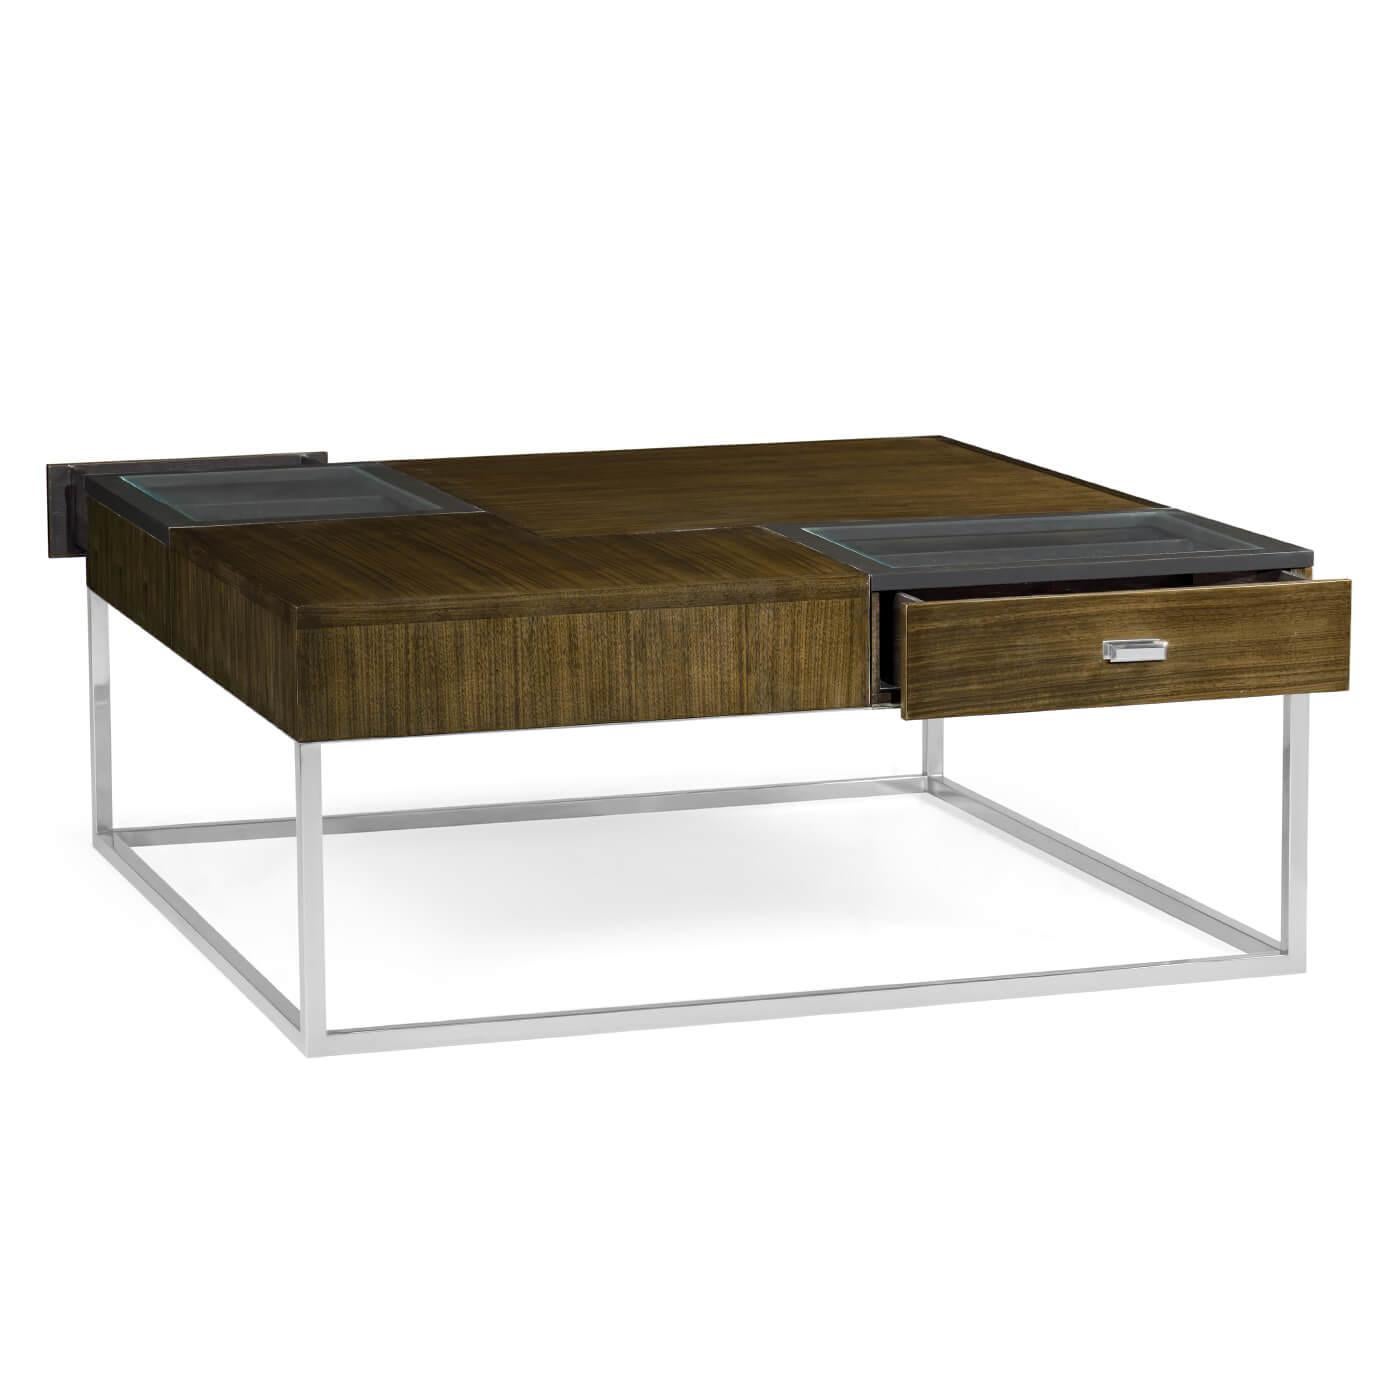 A modern square cocktail table with a warm walnut finish, two drawers with clear glass viewing tops on a square frame stainless steel base.

Dimensions: 48